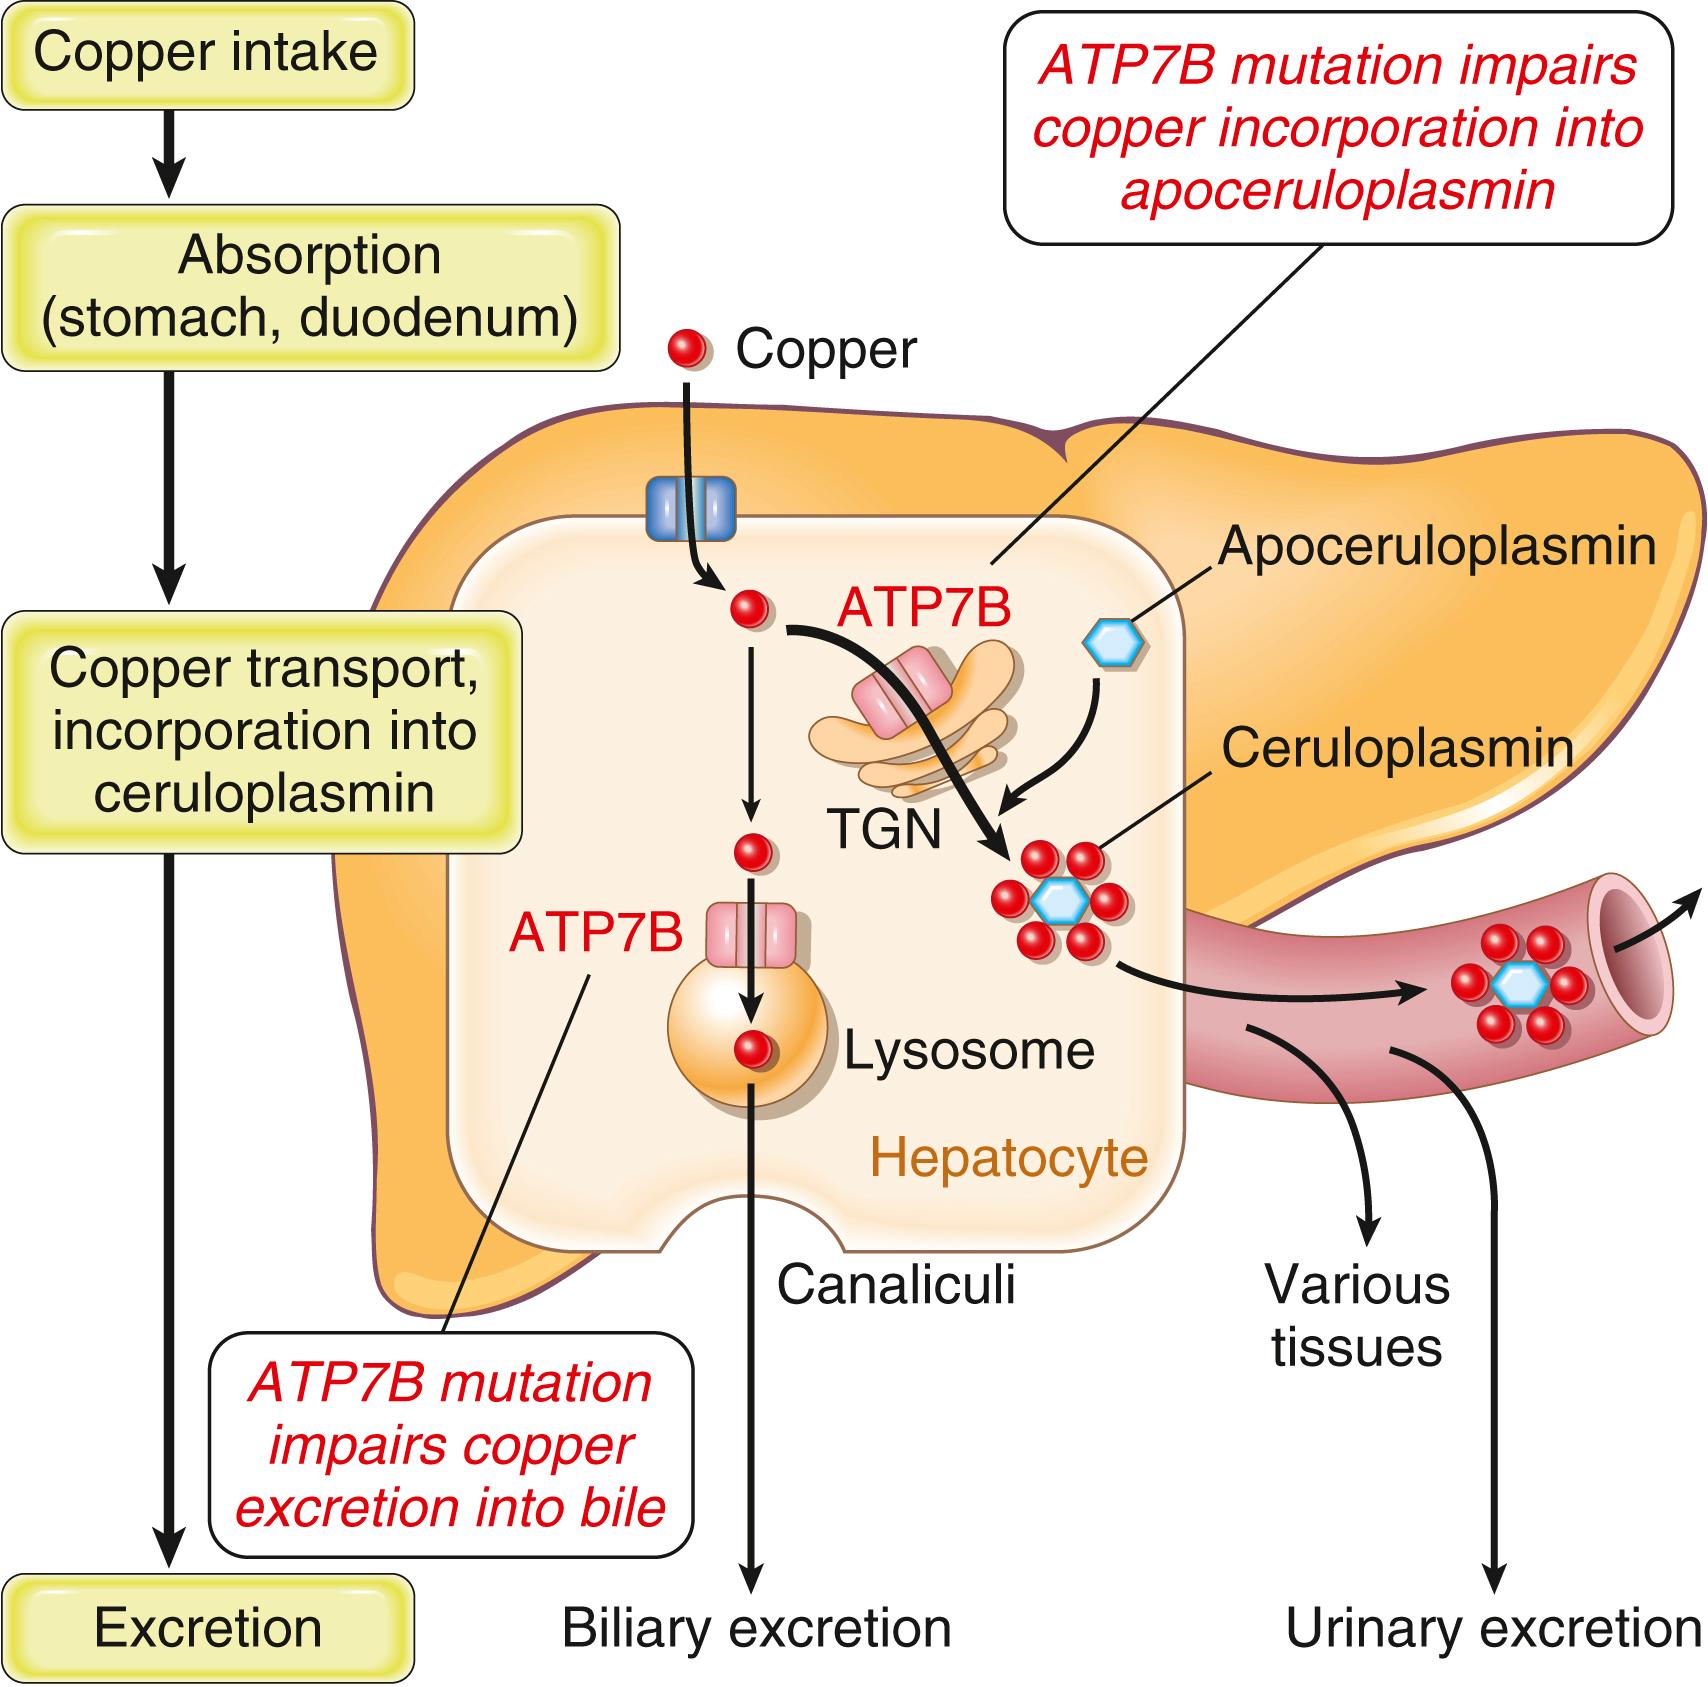 FIG. 14.22, Copper metabolism and consequences of mutation affecting ATP7B, the copper transporting hepatic protein. In Wilson disease failure of copper transport out of the hepatocytes into the blood in the form of ceruloplasmin and into bile cause accumulation of copper in the liver with resultant hepatocyte injury and eventual release of copper into the bloodstream with toxic injury to other tissues. TGN, Trans-Golgi network.